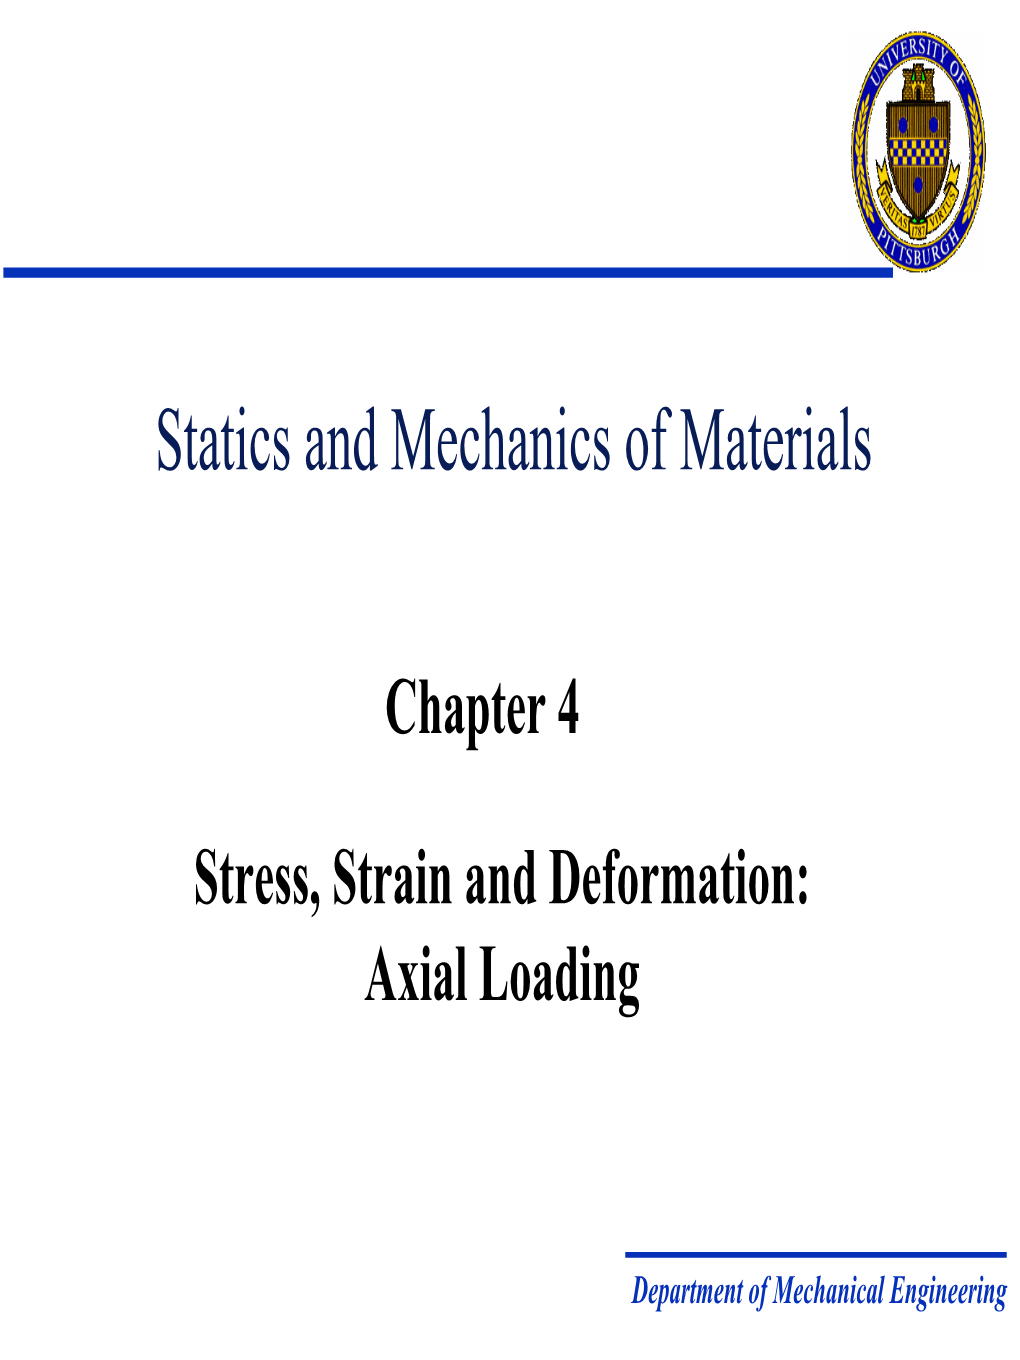 Stress, Strain and Deformation: Axial Loading Chapter 4